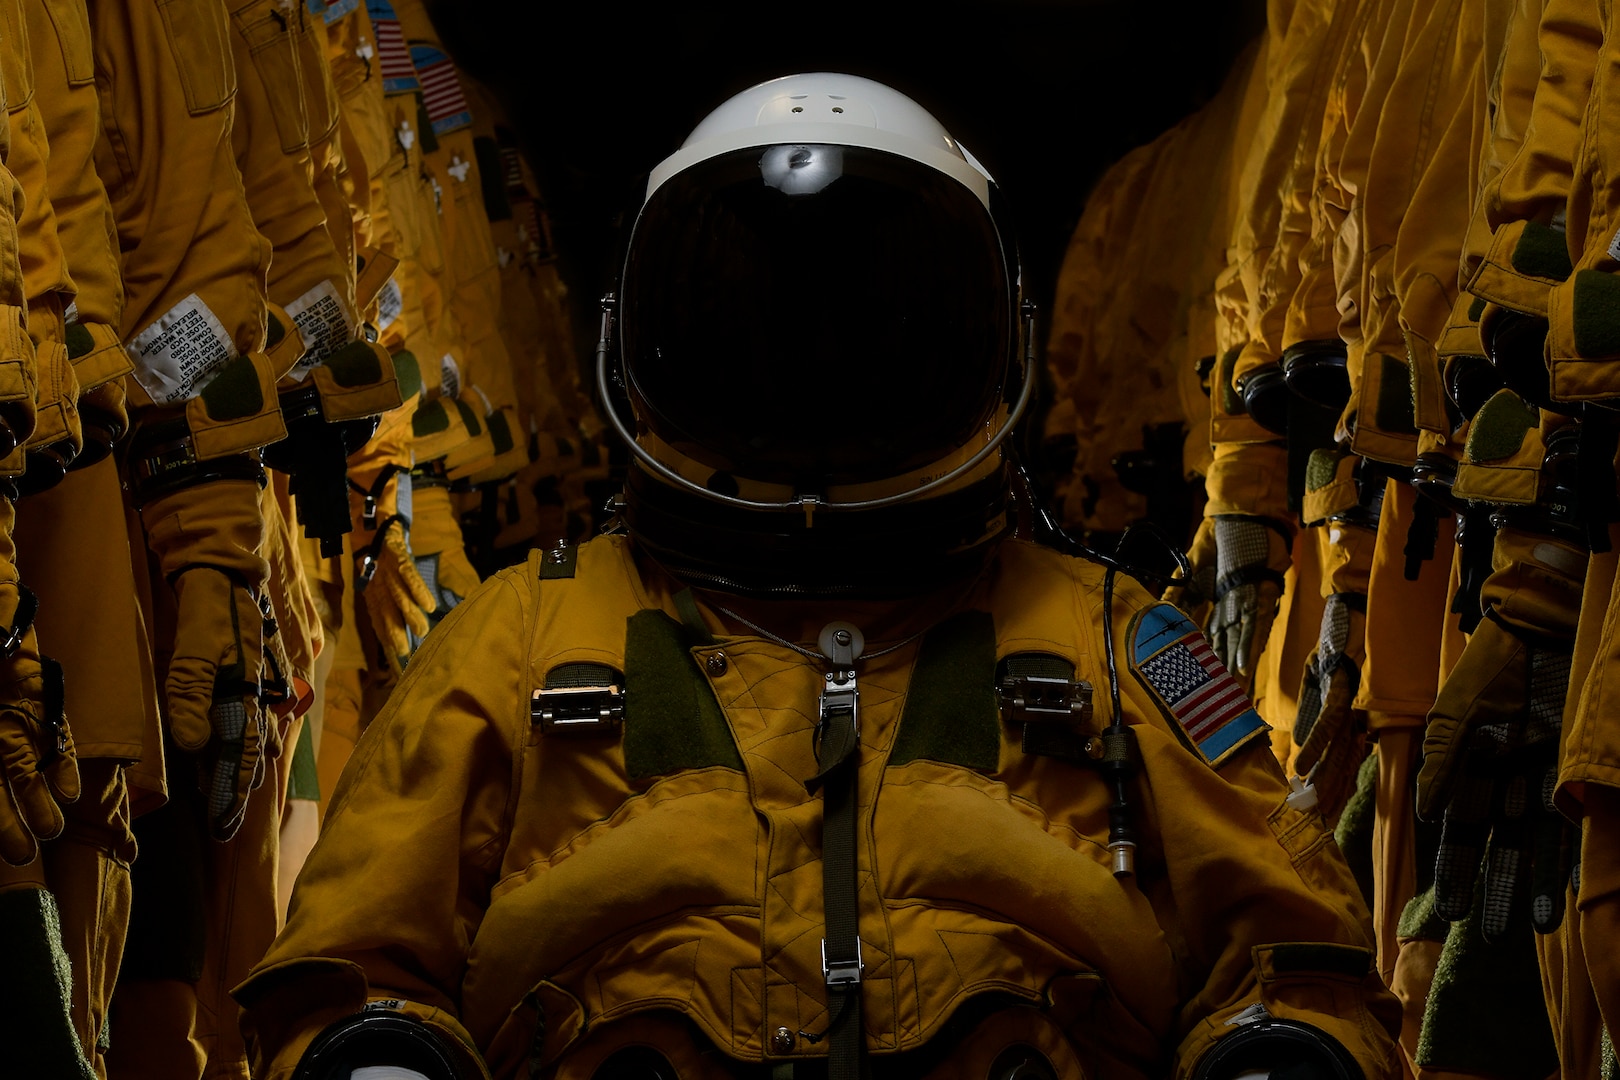 A U-2 Dragon Lady pilot poses for a portrait inside a pressure suit at Beale Air Force Base, California, October 31, 2019. Pilots who are flying into the rim of the atmosphere require a specialized and cuA U-2 Dragon Lady pilot poses for a portrait inside a pressure suit at Beale Air Force Base, California, October 31, 2019. Pilots who are flying into the rim of the atmosphere require a specialized and custom suit to their measurements keeping them at a normal altitude while going to extreme elevations.stom suit to their measurements keeping them at a normal altitude while going to extreme elevations.